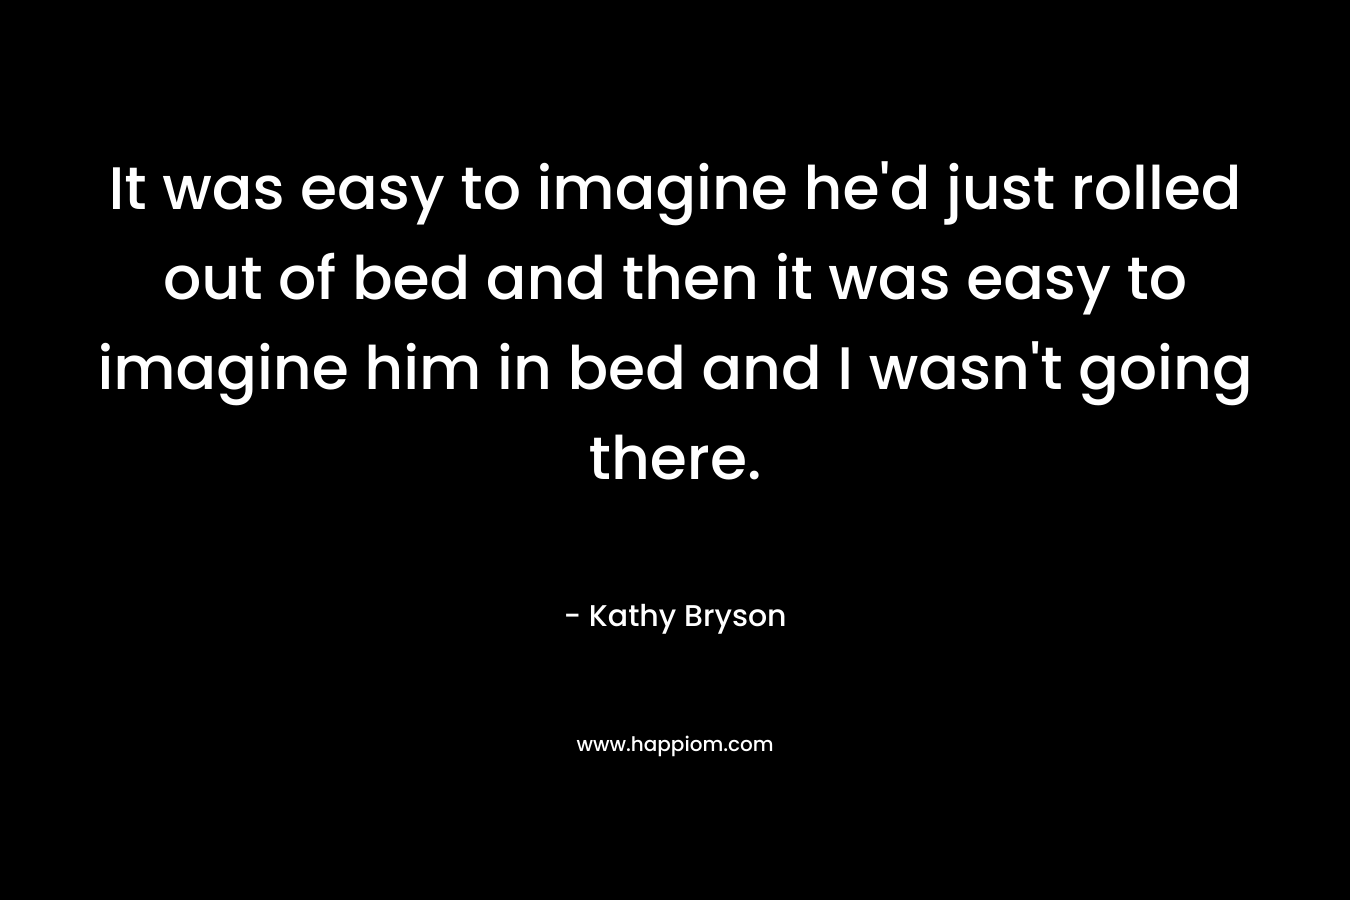 It was easy to imagine he’d just rolled out of bed and then it was easy to imagine him in bed and I wasn’t going there. – Kathy Bryson